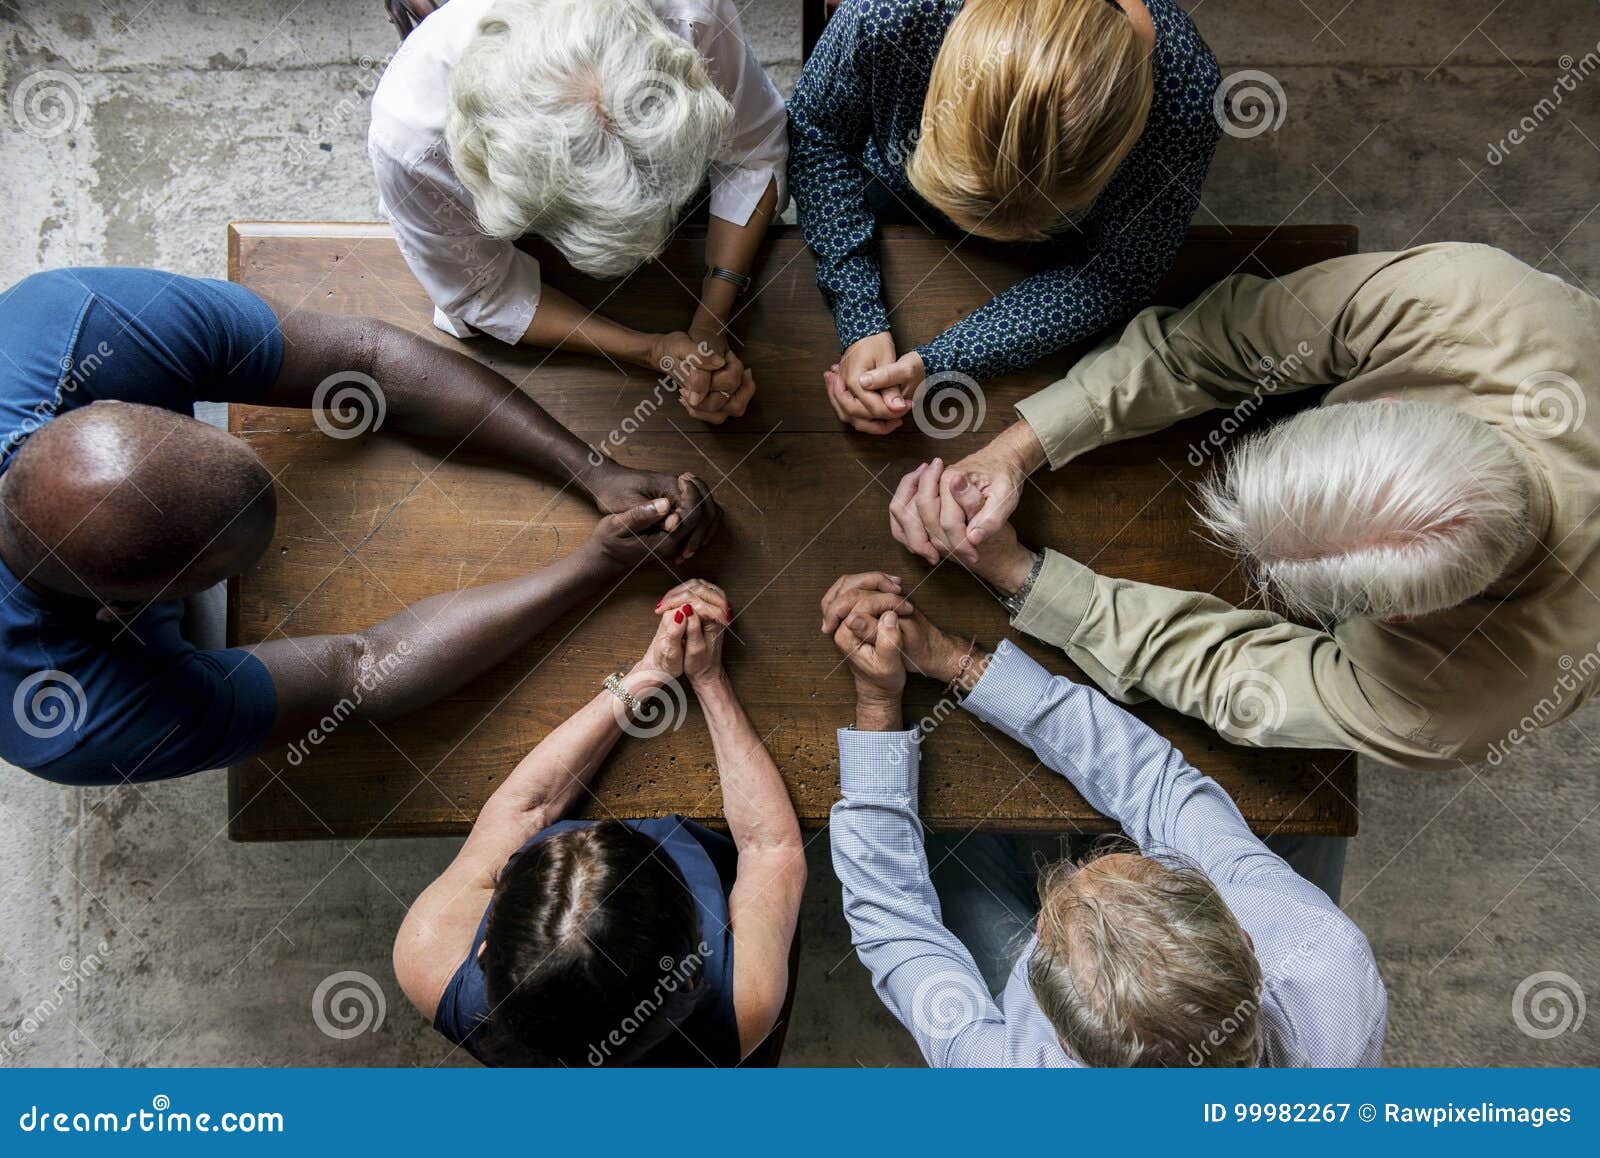 group of christianity people praying hope together